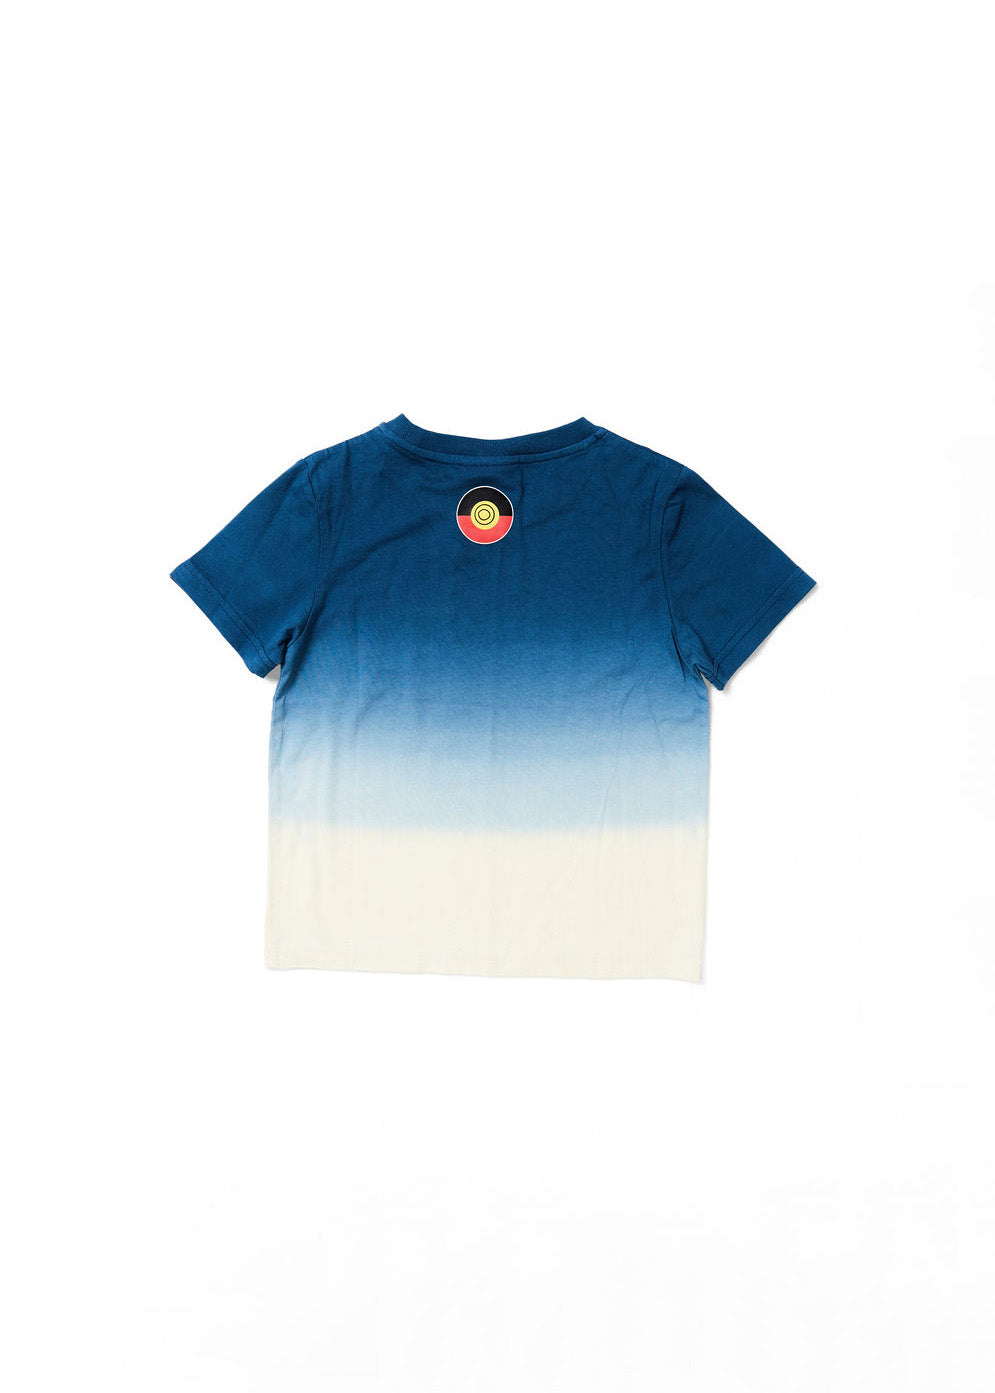 Clothing The Gaps. Kids Dip Dye 'Always Was, Always Will Be' Tee. Blue died t-shirt that fades down from the top of t-shirt to lighter blues then a cream white. With a Black, yellow and red 'always was always will be' text screen printed in left corner pocket sized.